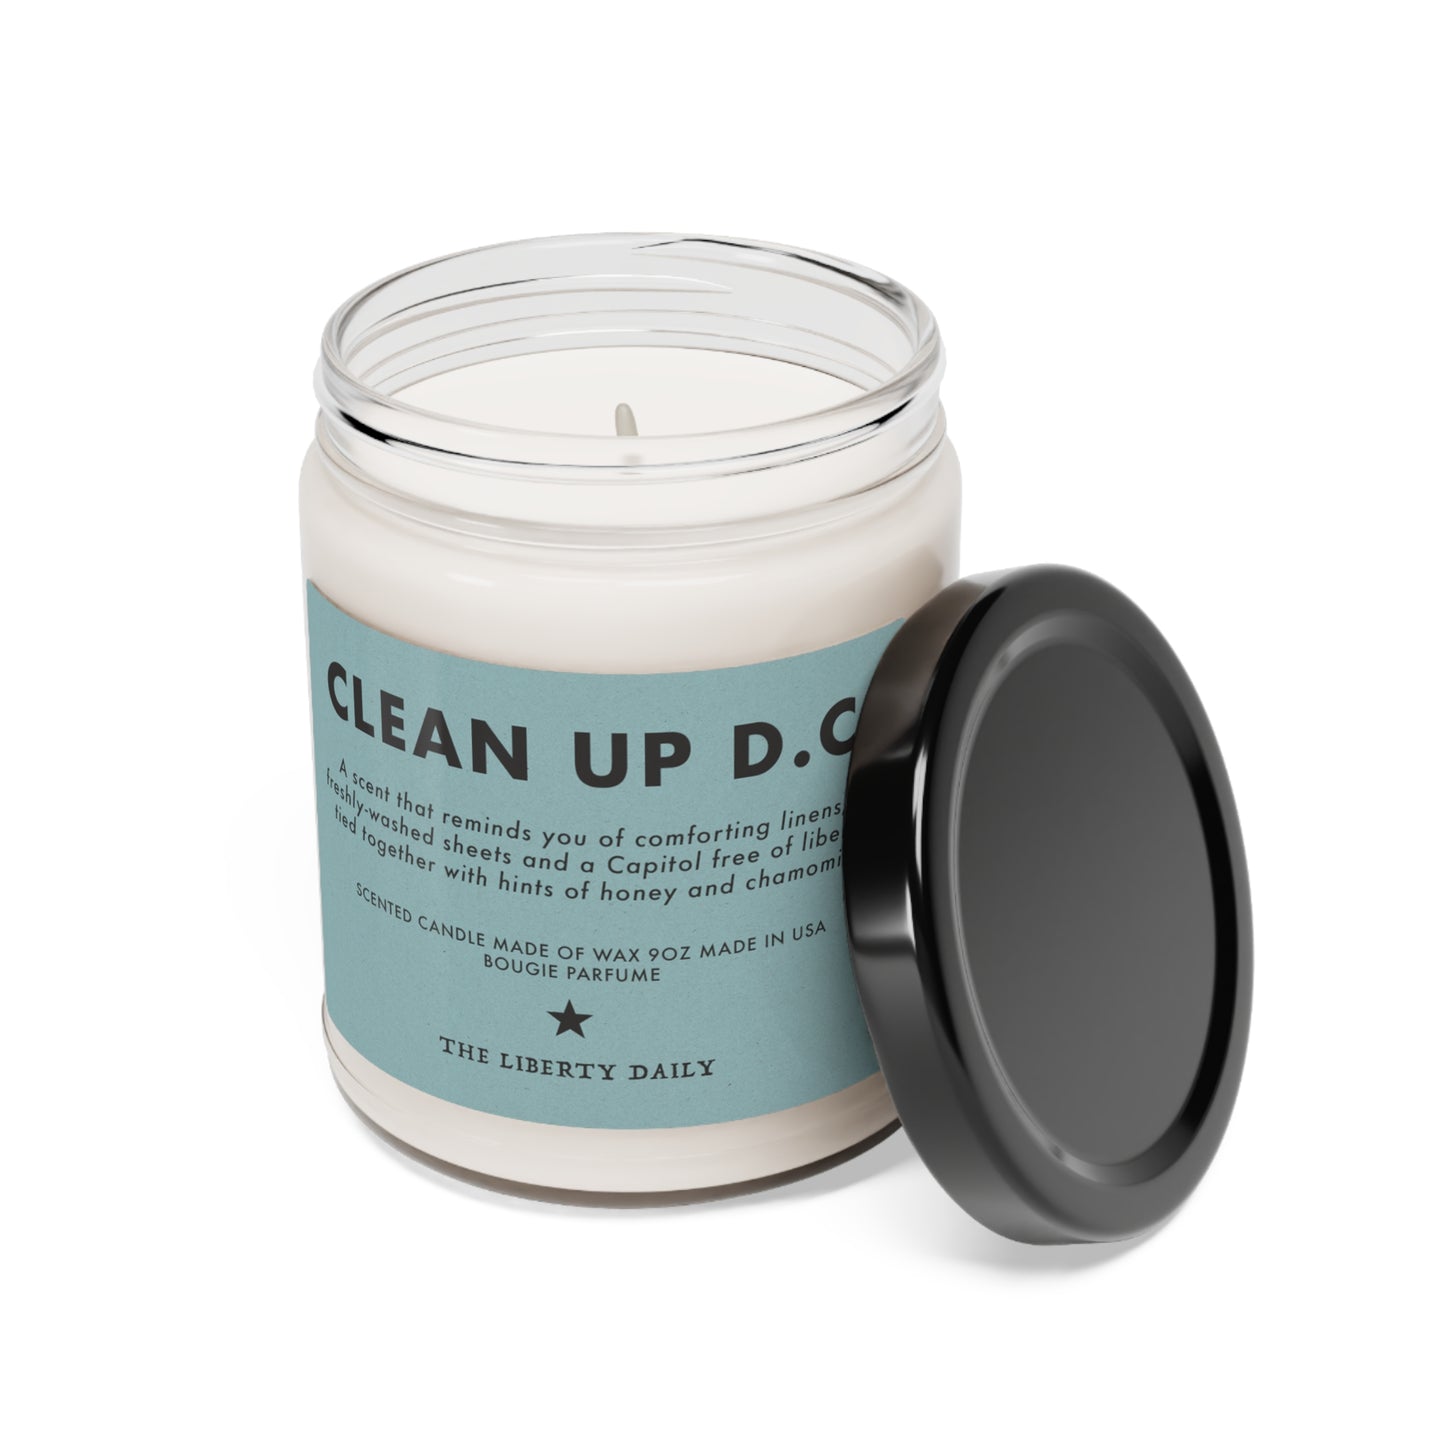 Clean Up D.C. Candle